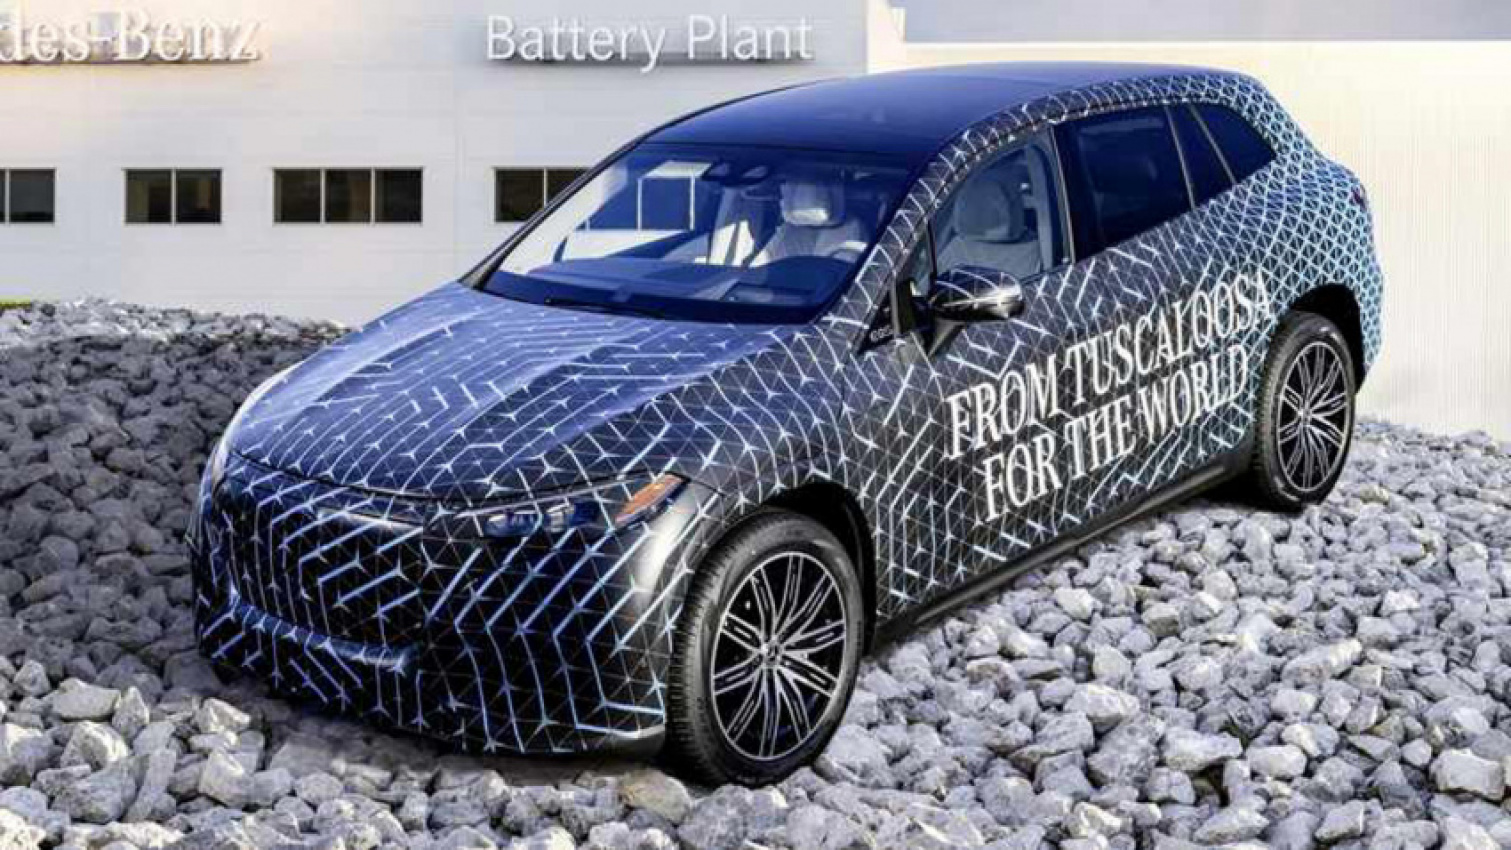 autos, cars, mercedes-benz, mercedes, vnex, mercedes eqs suv previewed, complete with advanced hyperscreen cabin